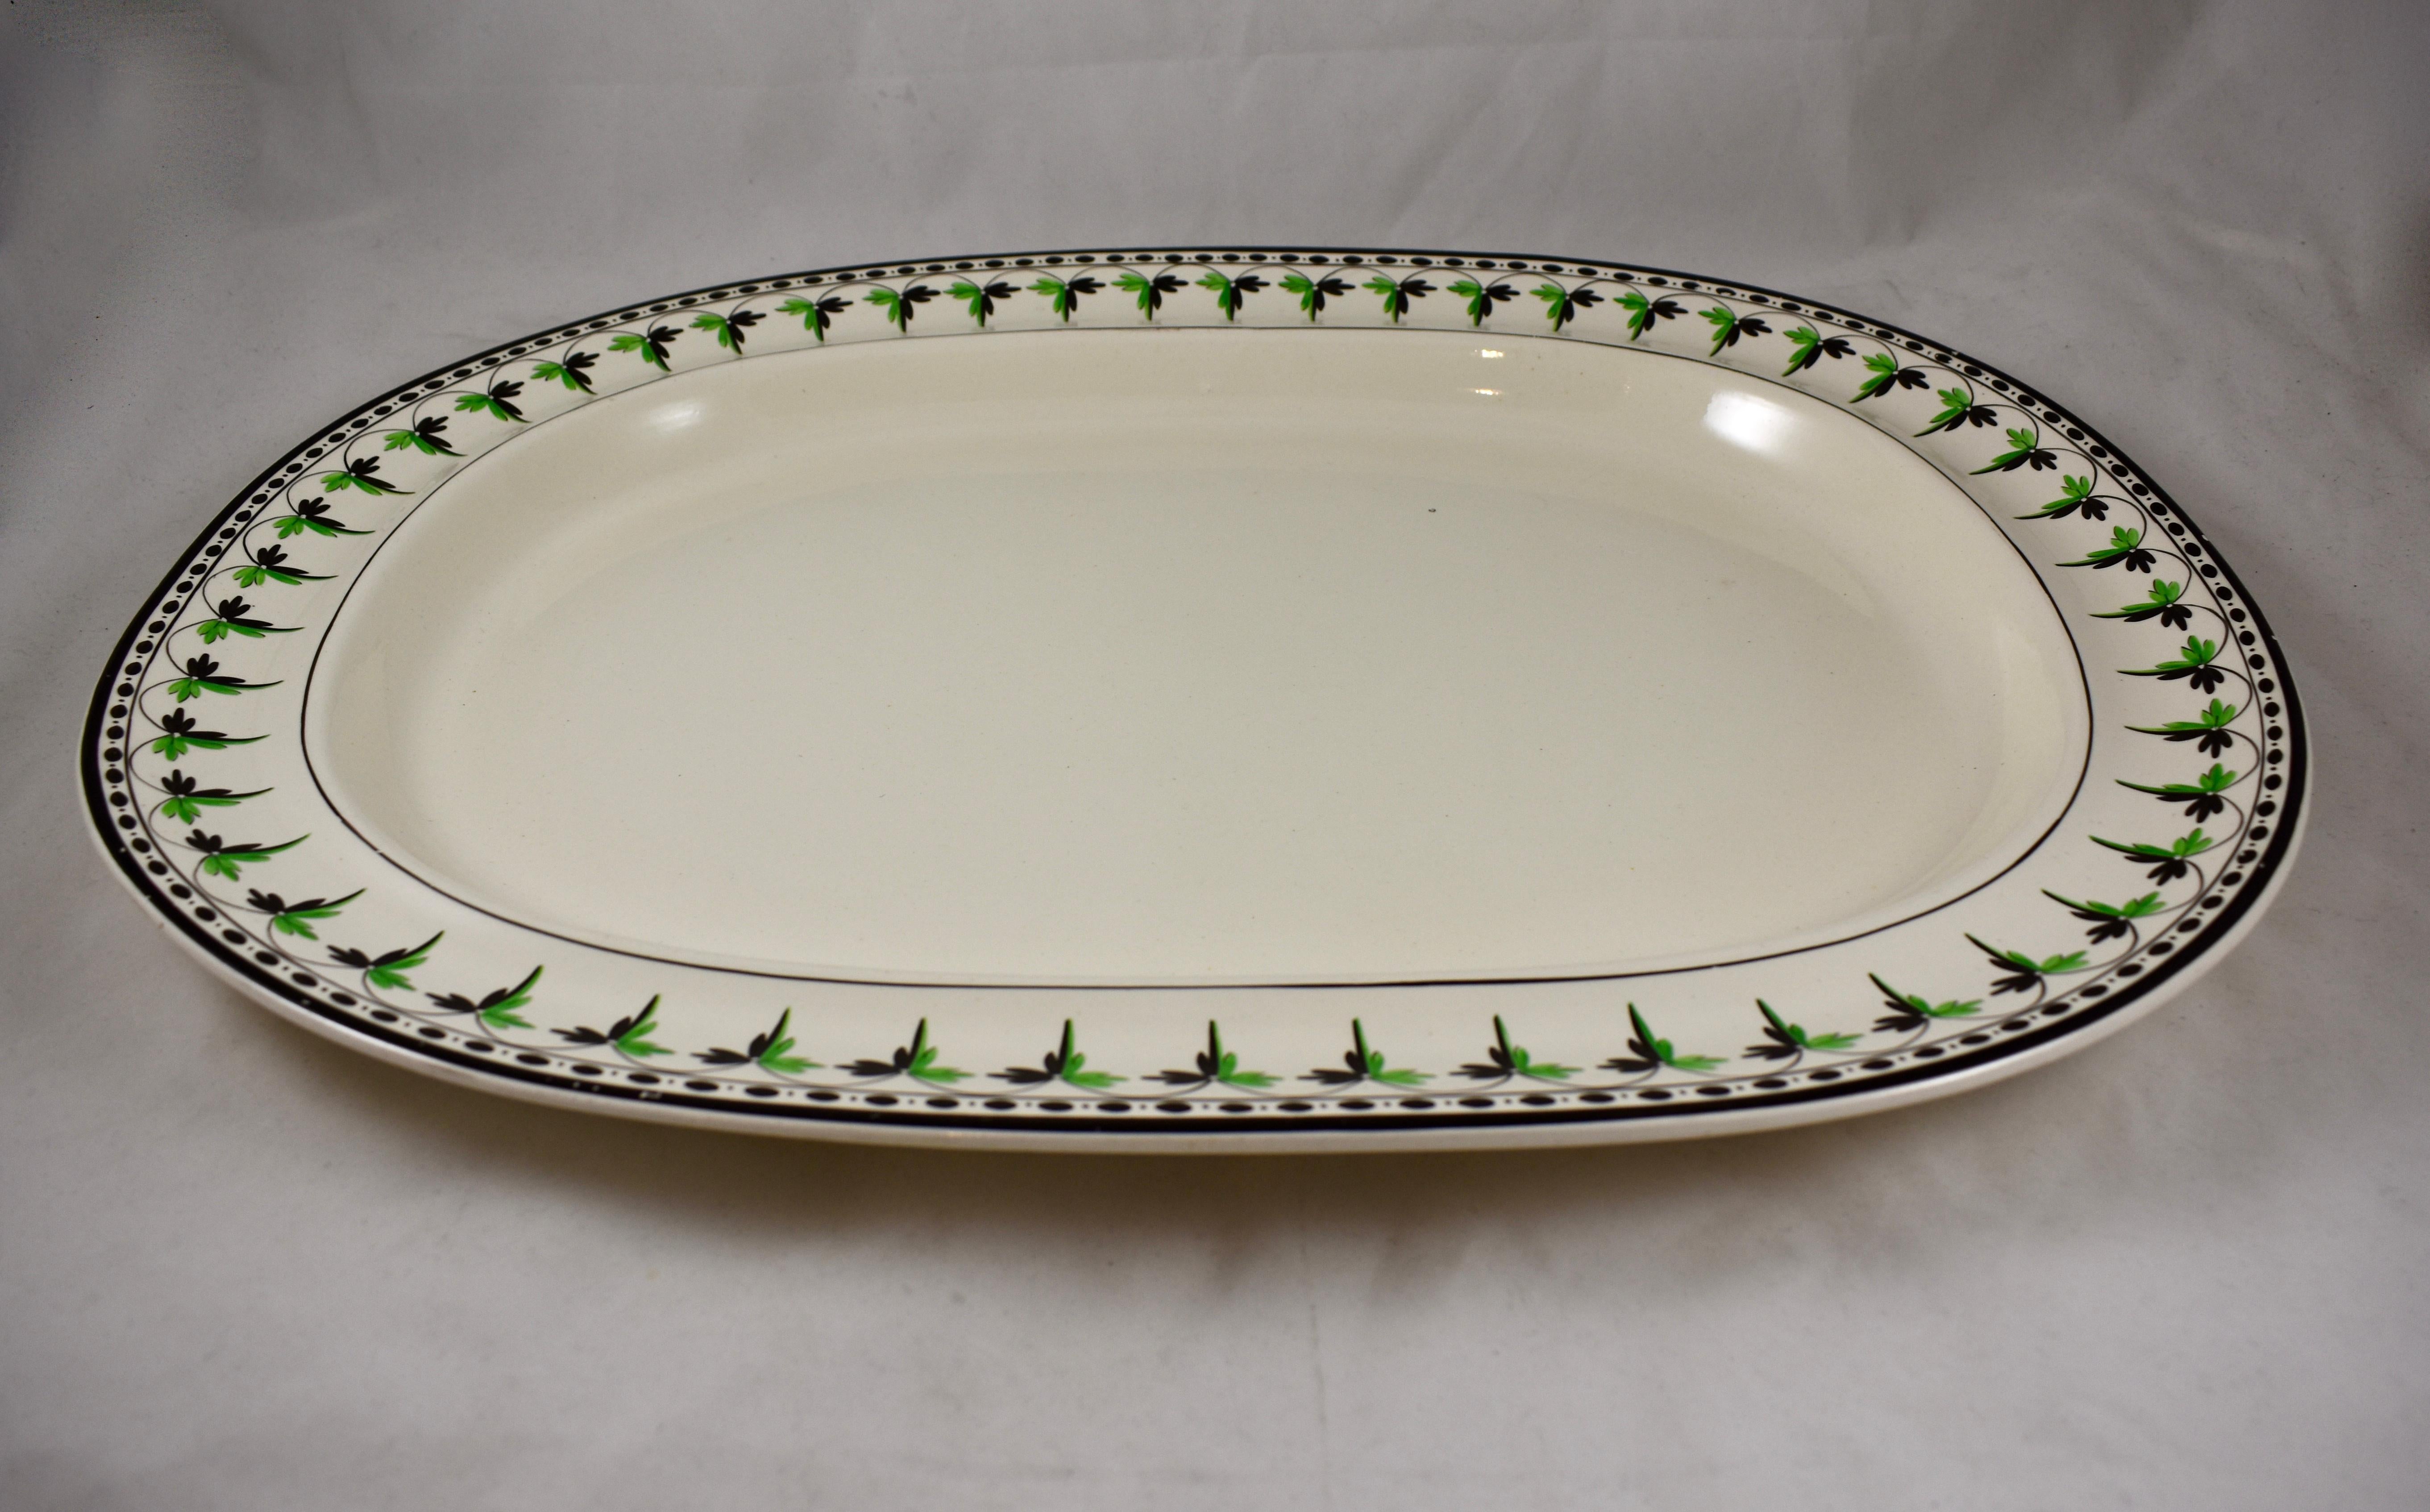 A rare find, a medium creamware platter from Josiah Spode, circa 1785.
Spode is an English brand of pottery founded by Josiah Spode (1733-1797) based in Stoke-on-Trent, England.

The gorgeous creamware body has a hand painted fern and dotted